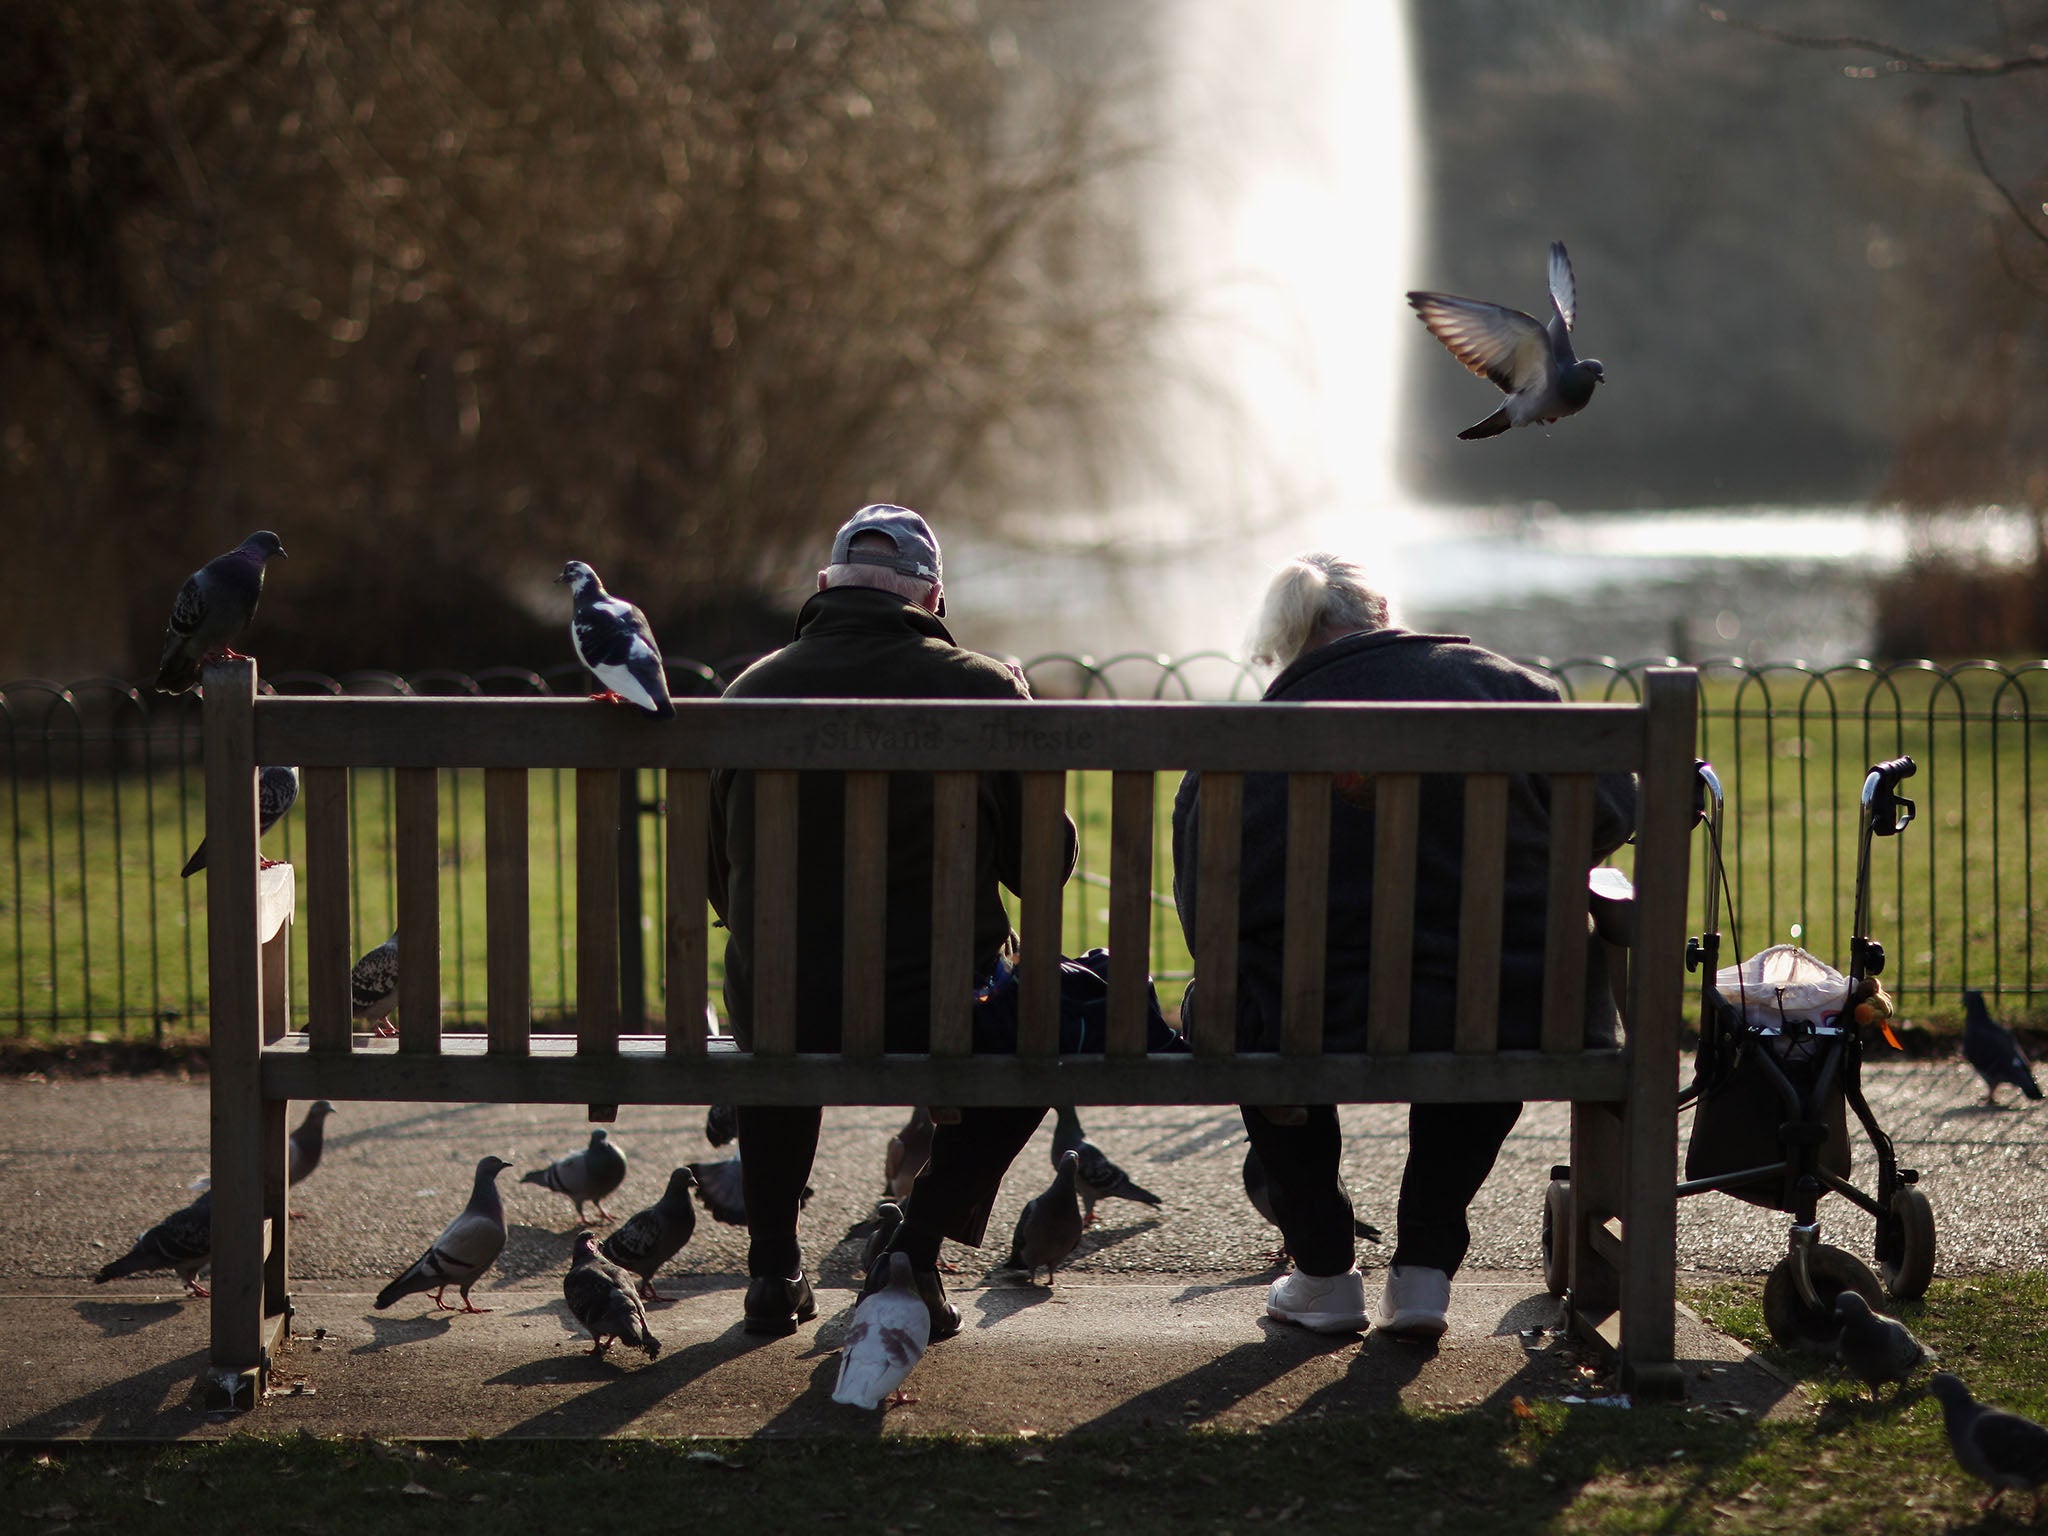 A new law that allows councils to ban activities in public spaces is leading to “bizarre new criminal offences”, which could see homeless people, buskers and people who feed pigeons prosecuted.